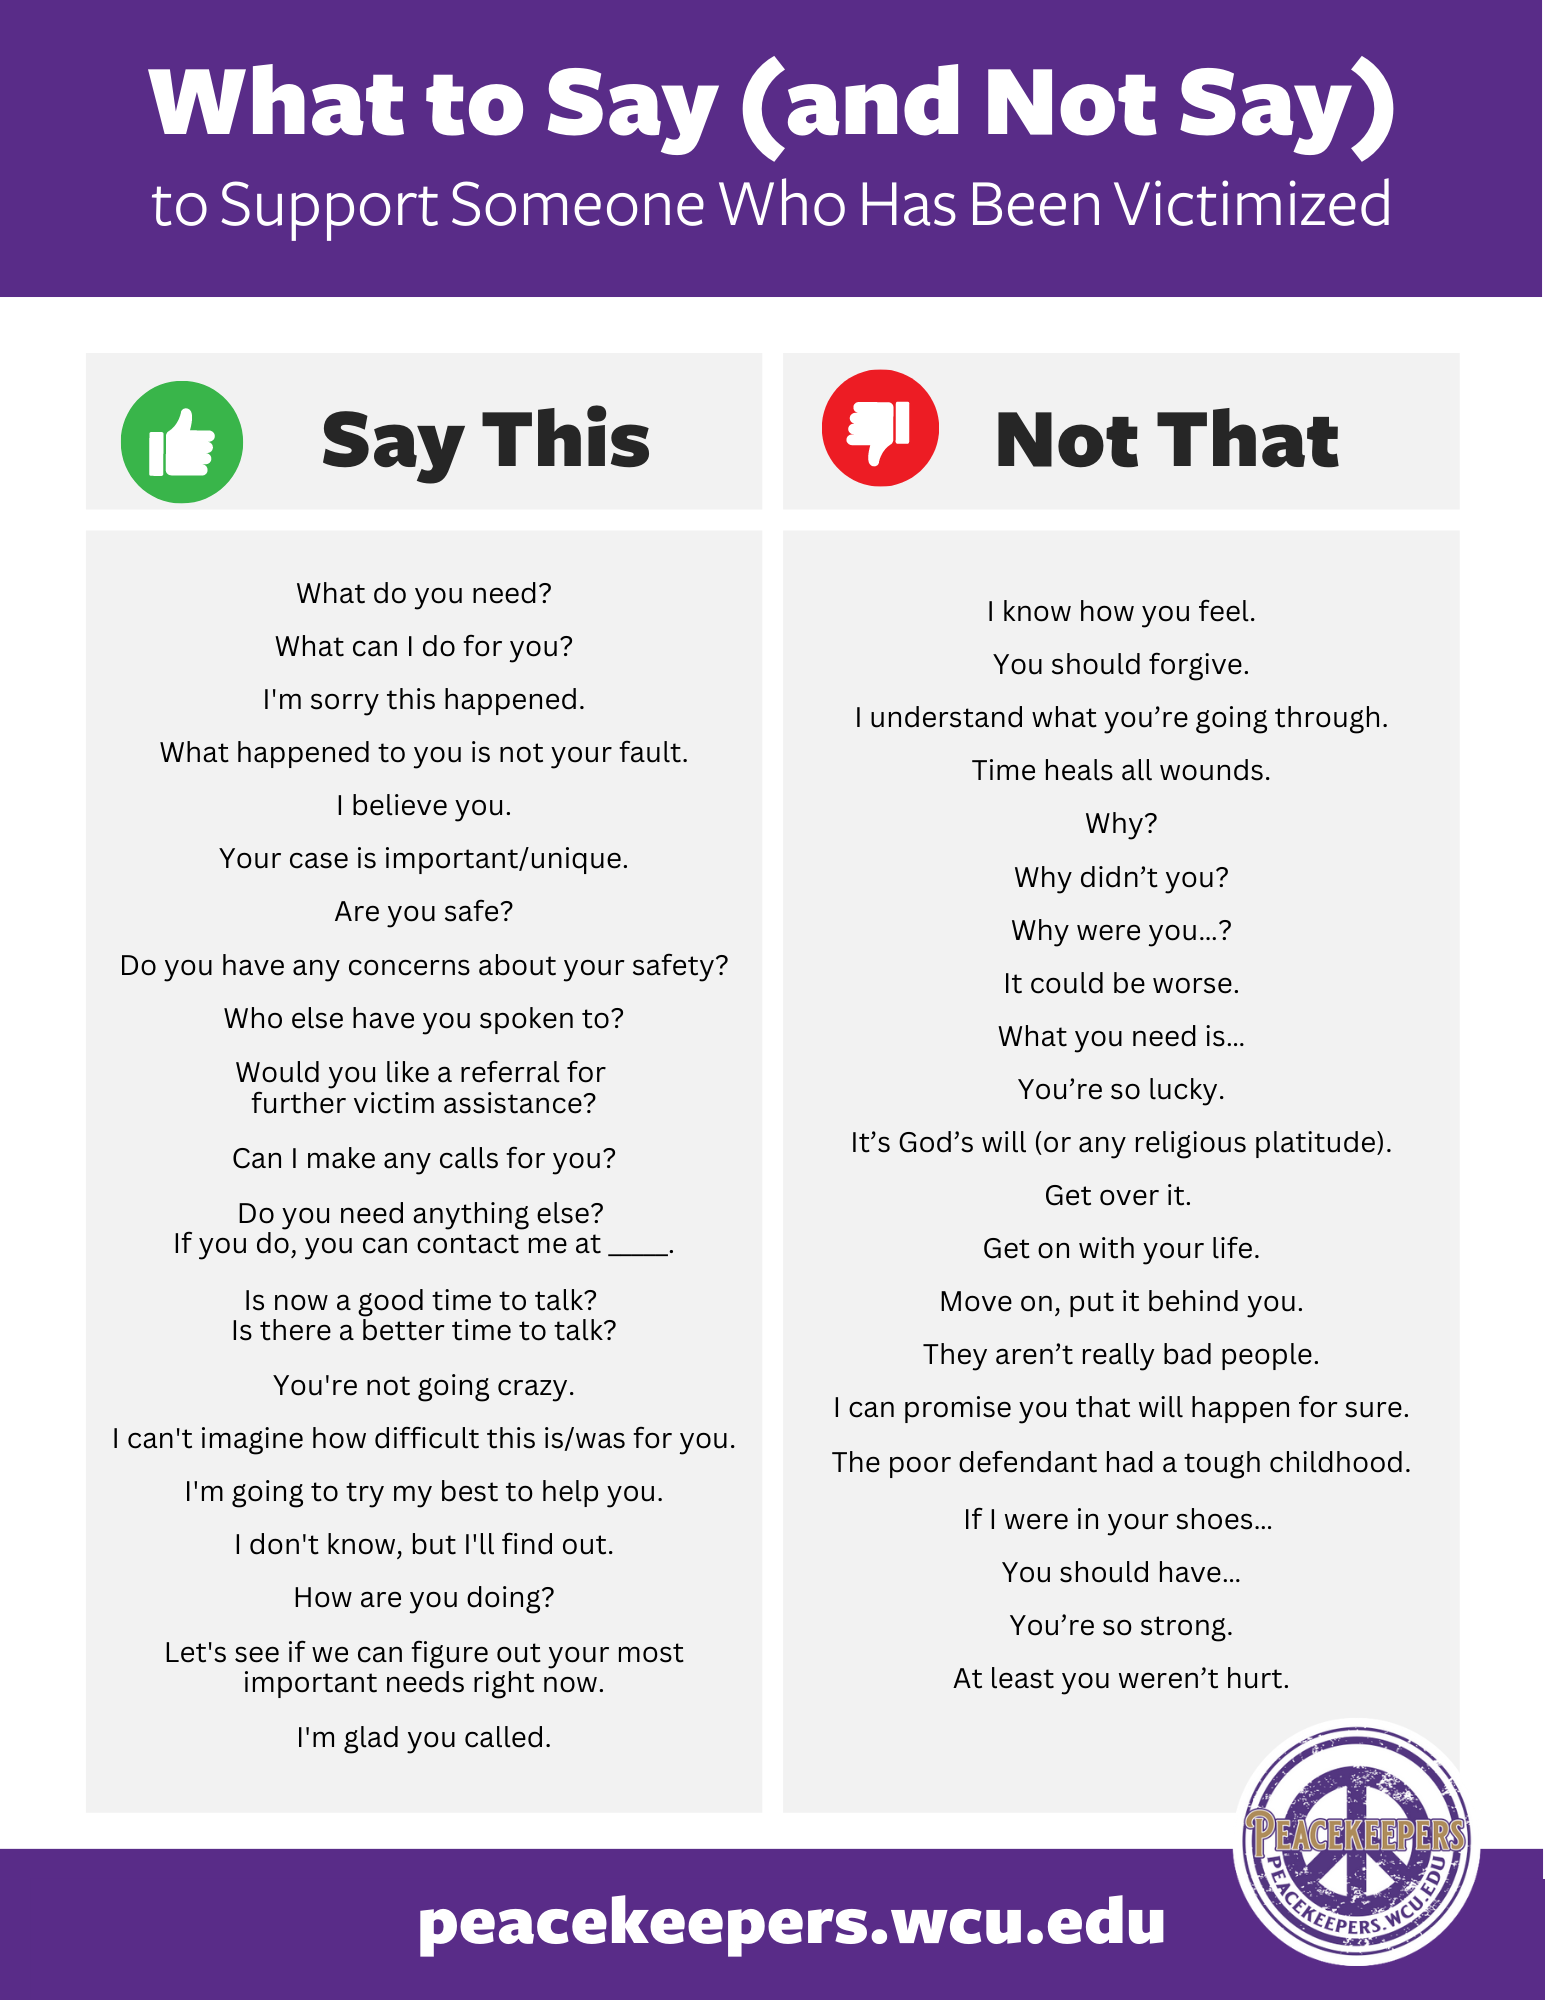 A thumbnail of a handout with "Say This, Not That" at the top.